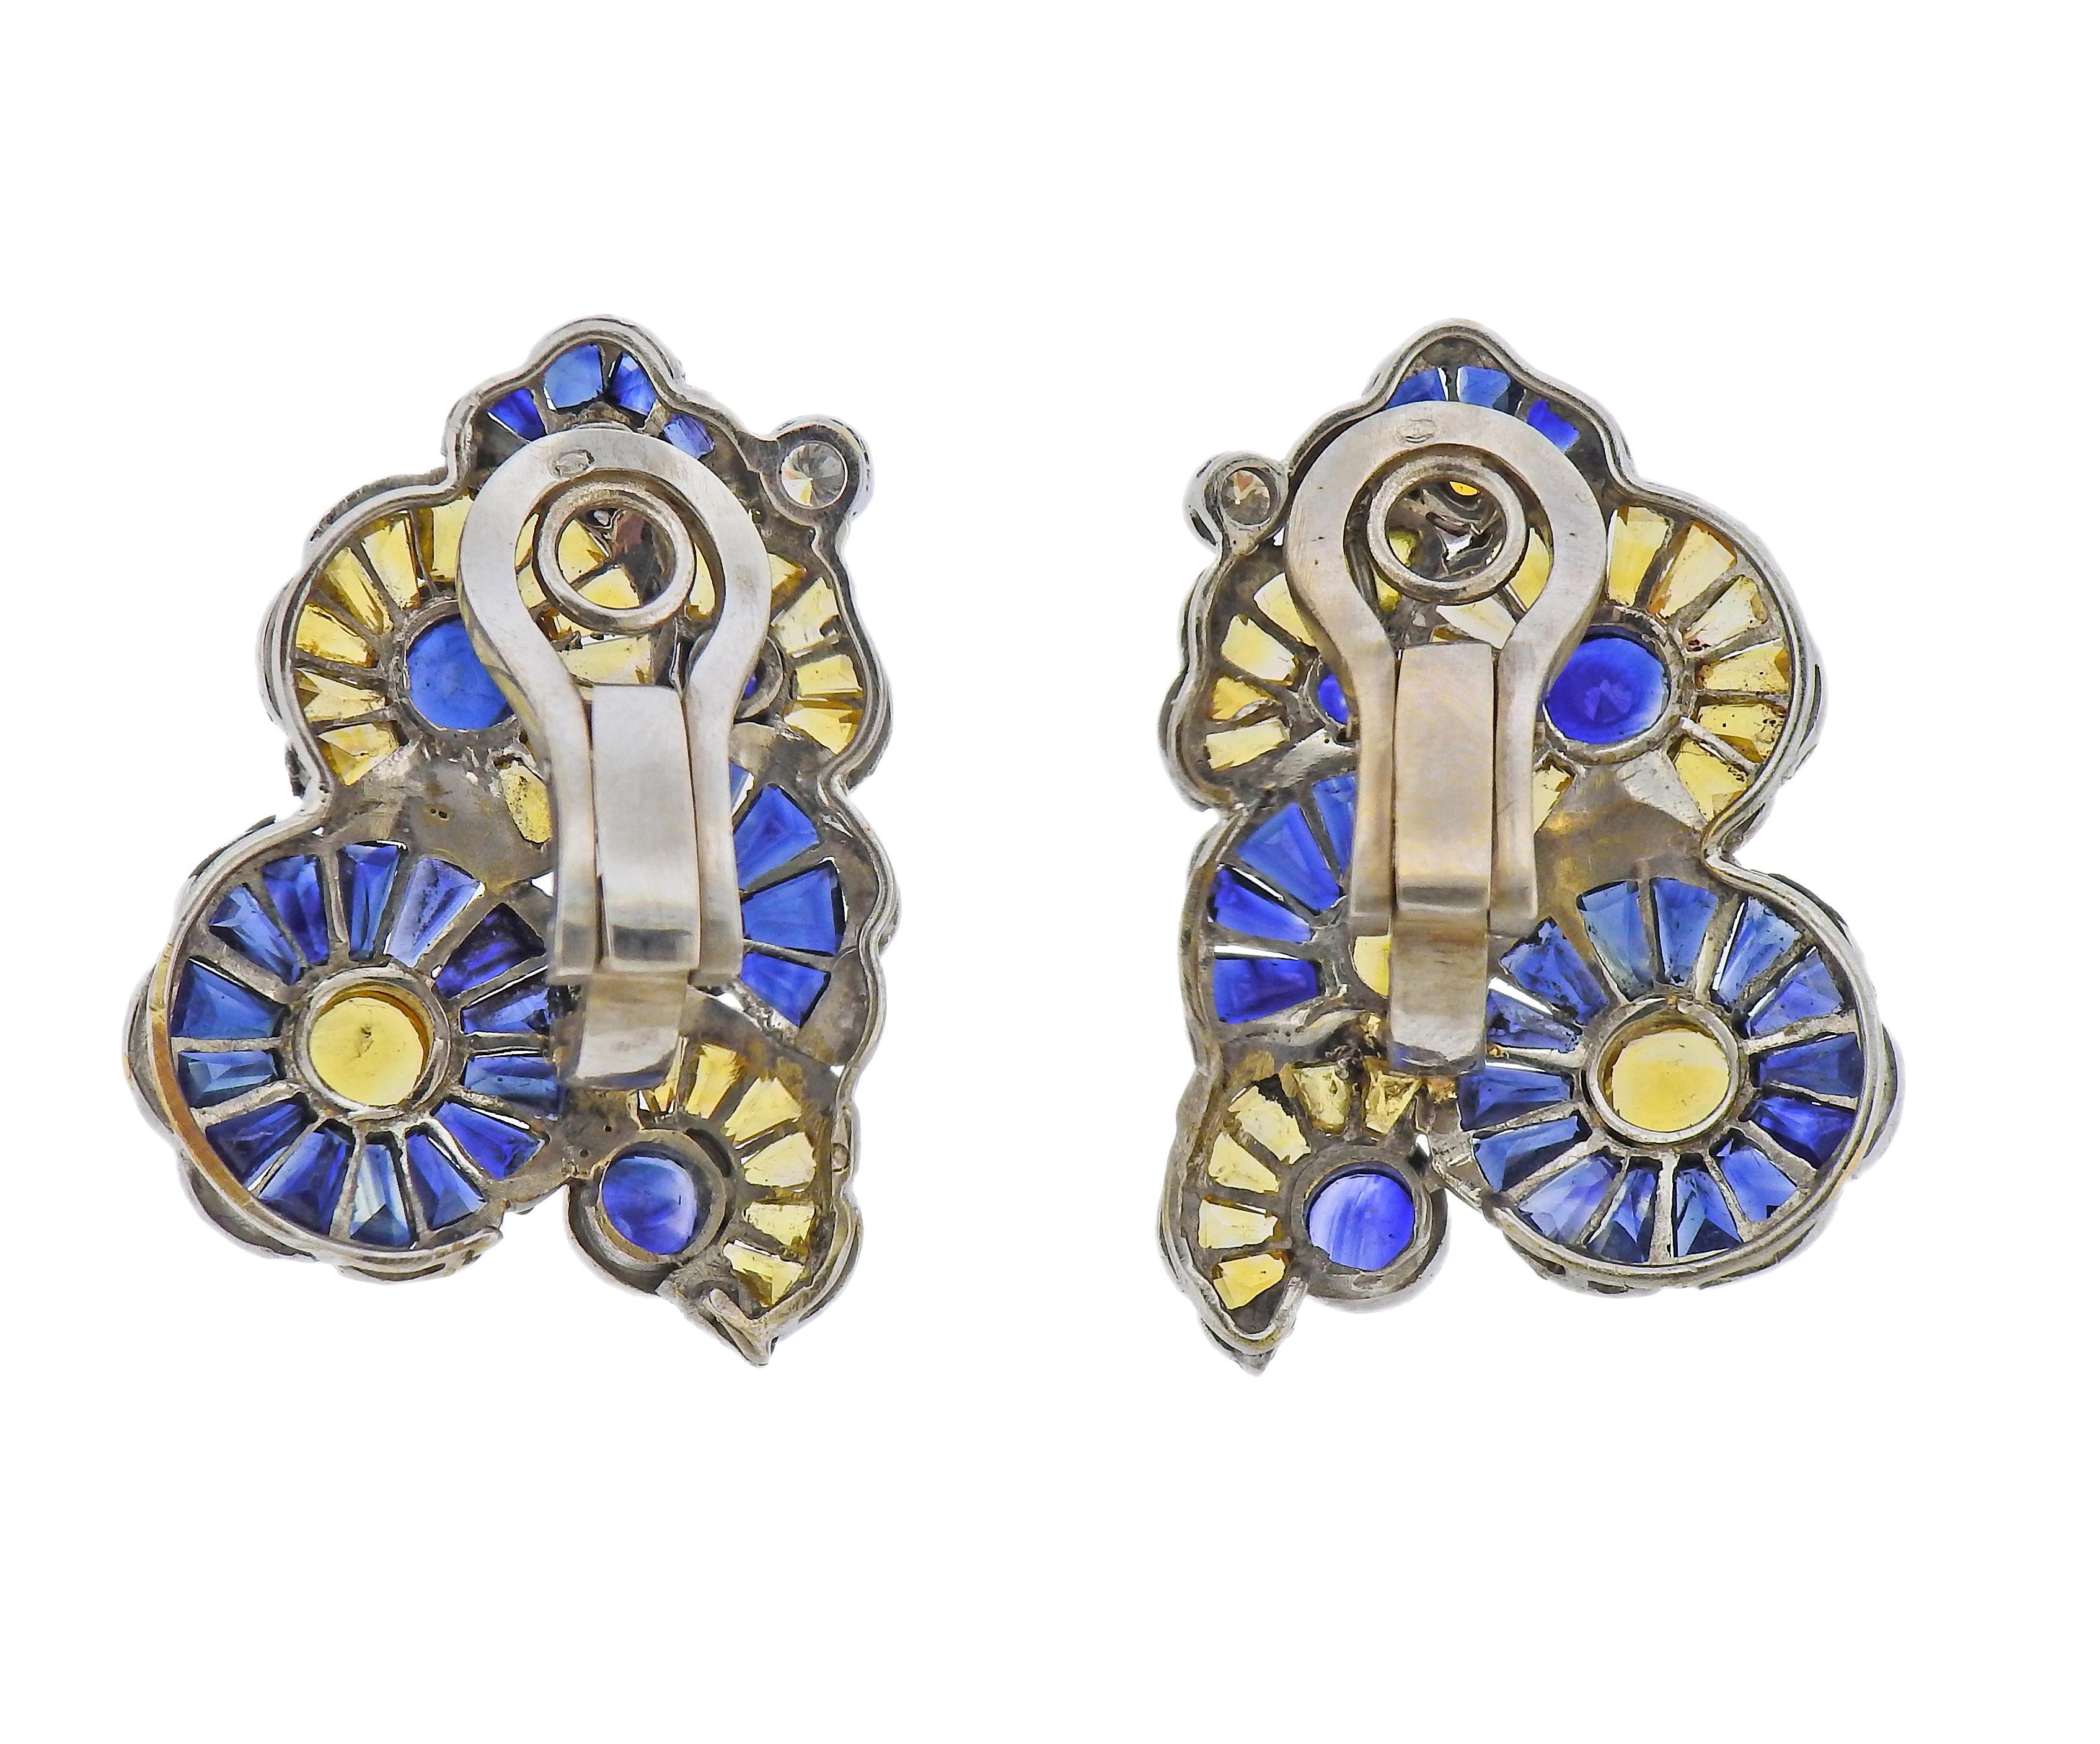 Mid Century 14k gold earring, with blue and yellow sapphires, and approx. 0.14ctw in diamonds. Earrings are 31mm x 23mm. Marked with gold mark on the backs. Weight - 16.4 grams.